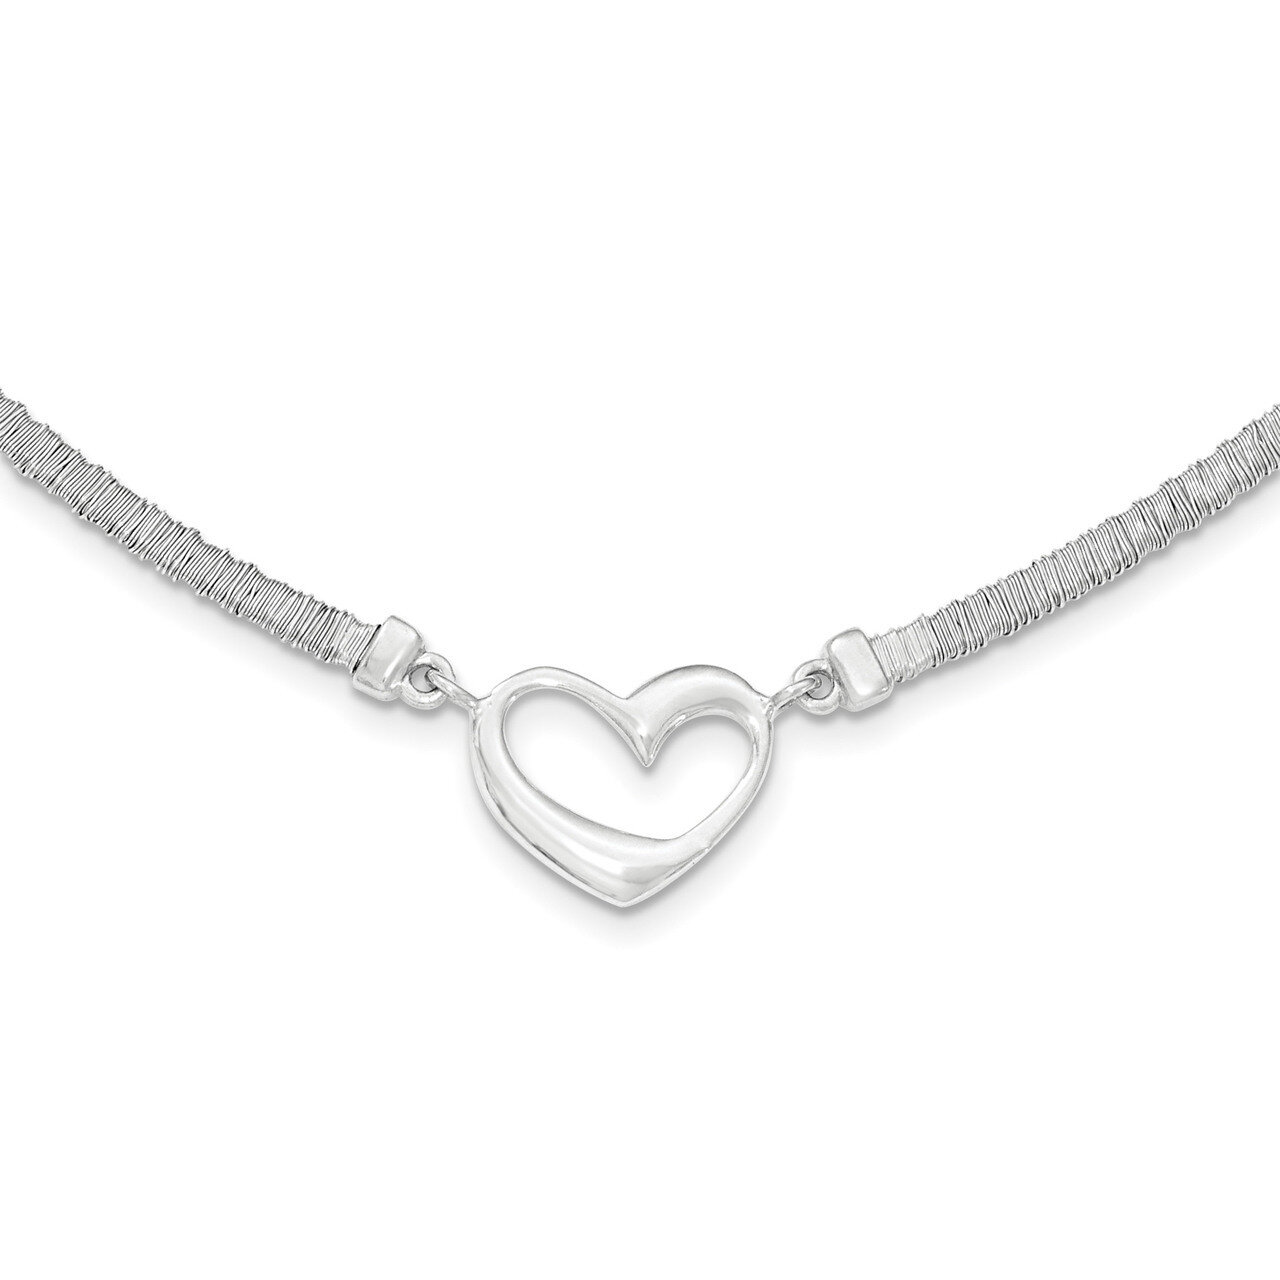 Polished Textured Heart Necklace with 1 Inch Extender Sterling Silver QG3824-16